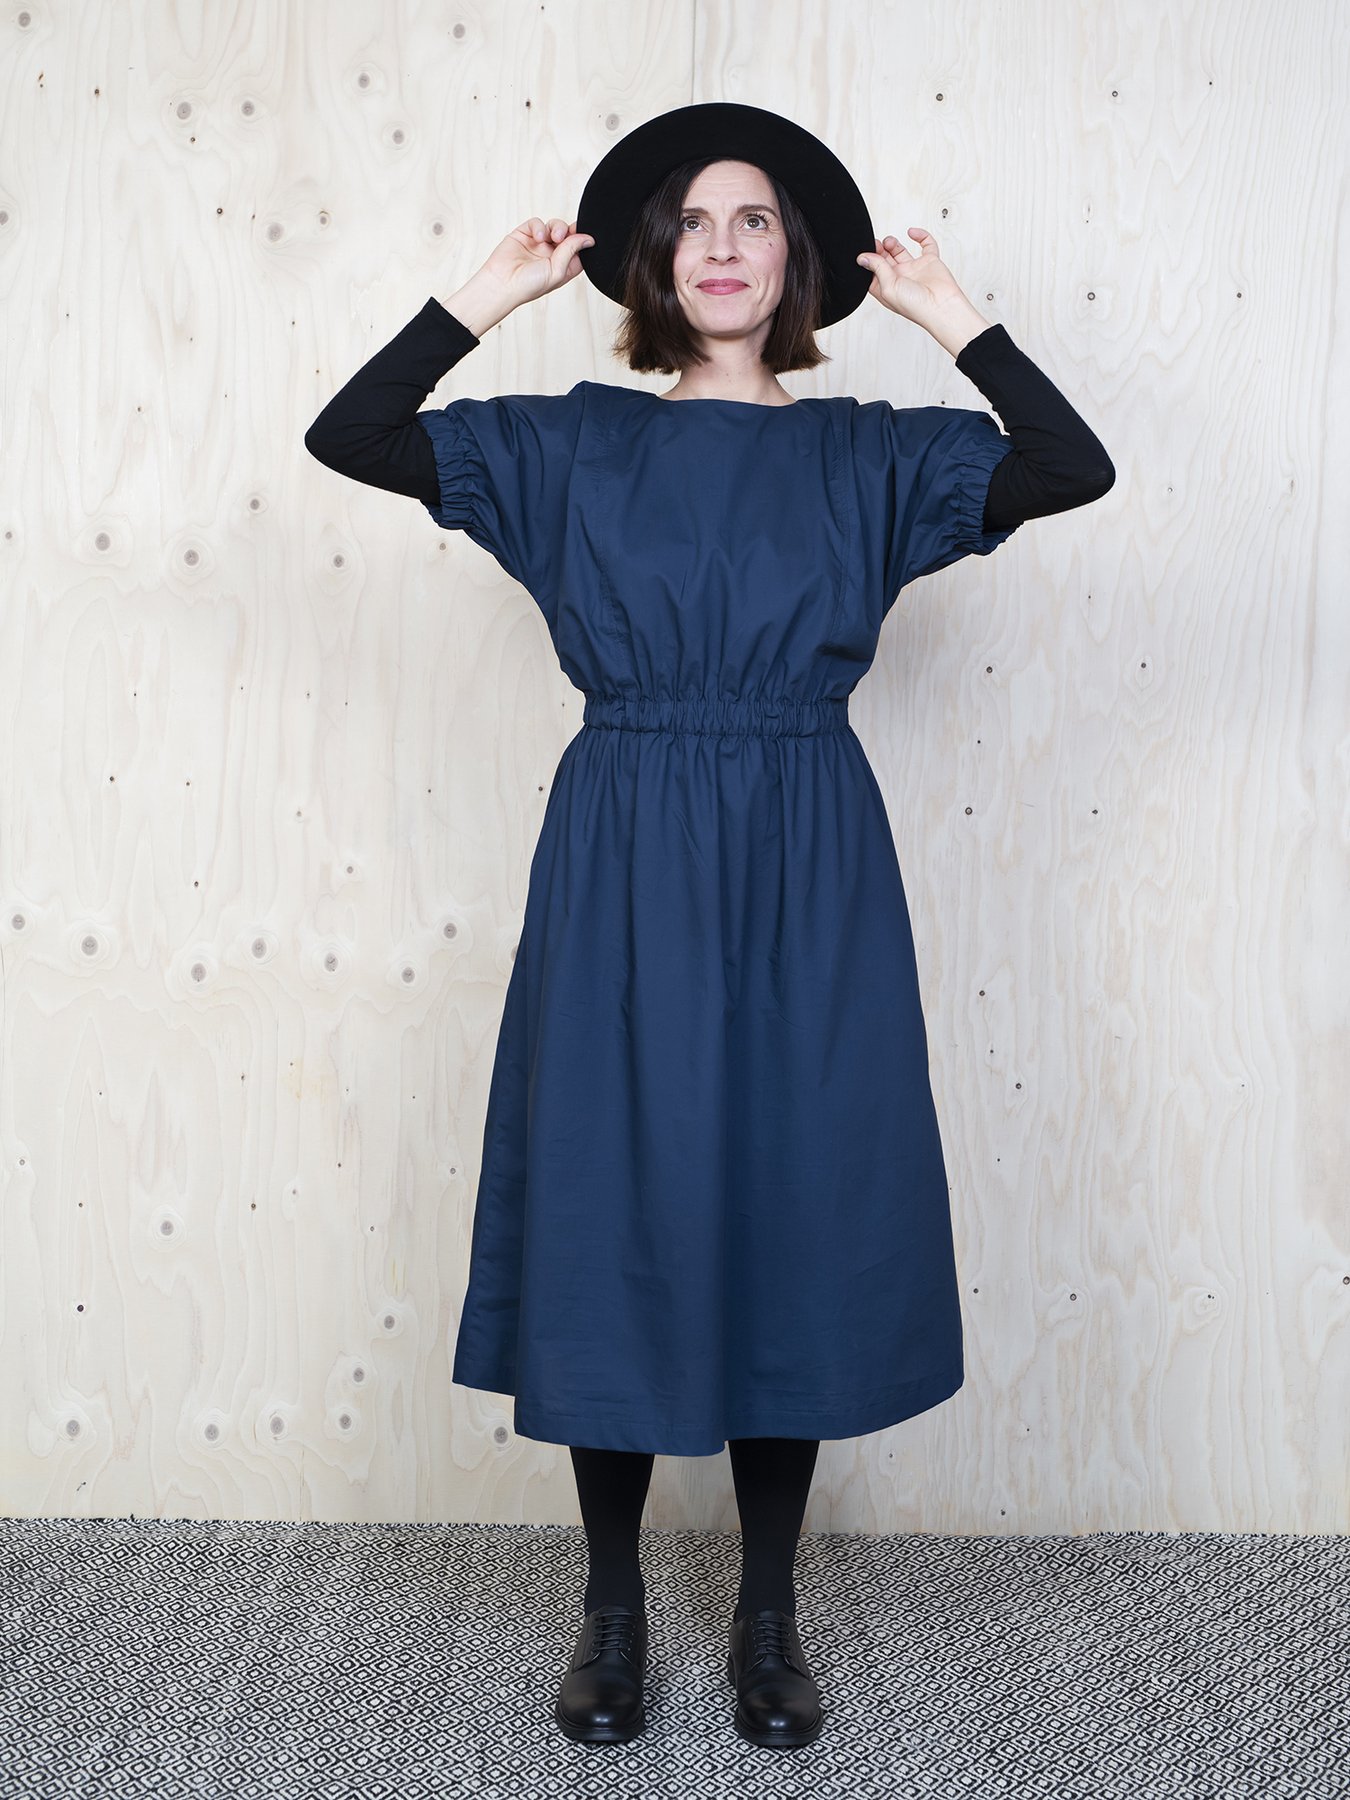 Woman wearing the Cuff Dress sewing pattern from The Assembly Line on The Fold Line. A dress pattern made in cotton, silk, lawn, linen, crepe de chine or wool crepe fabrics, featuring a mid-length finish, relaxed fit, round neck with keyhole opening in the back, side pockets, elastic waist and cap sleeves with elasticated cuffs.